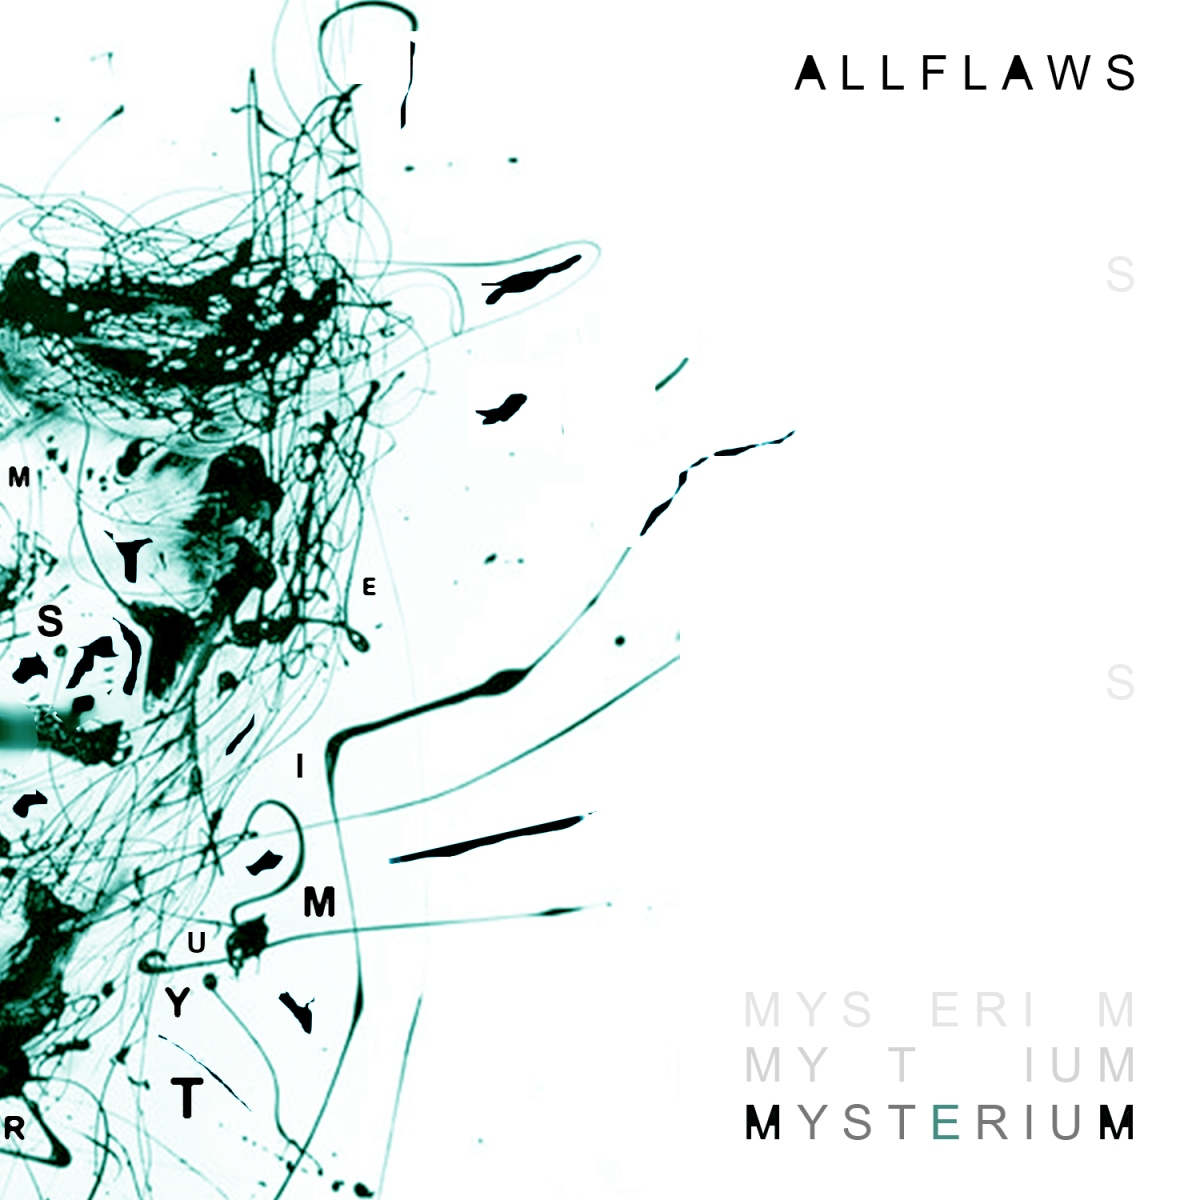 ALLFLAWS – MYSTERIUM  LP (Stream On Spotify) A journey into into different elements of Electronica, Trip Hop, Industrial Music, Spoken Word, Industrial Hip Hop, Electro Industrial, Experimental Hip Hop.